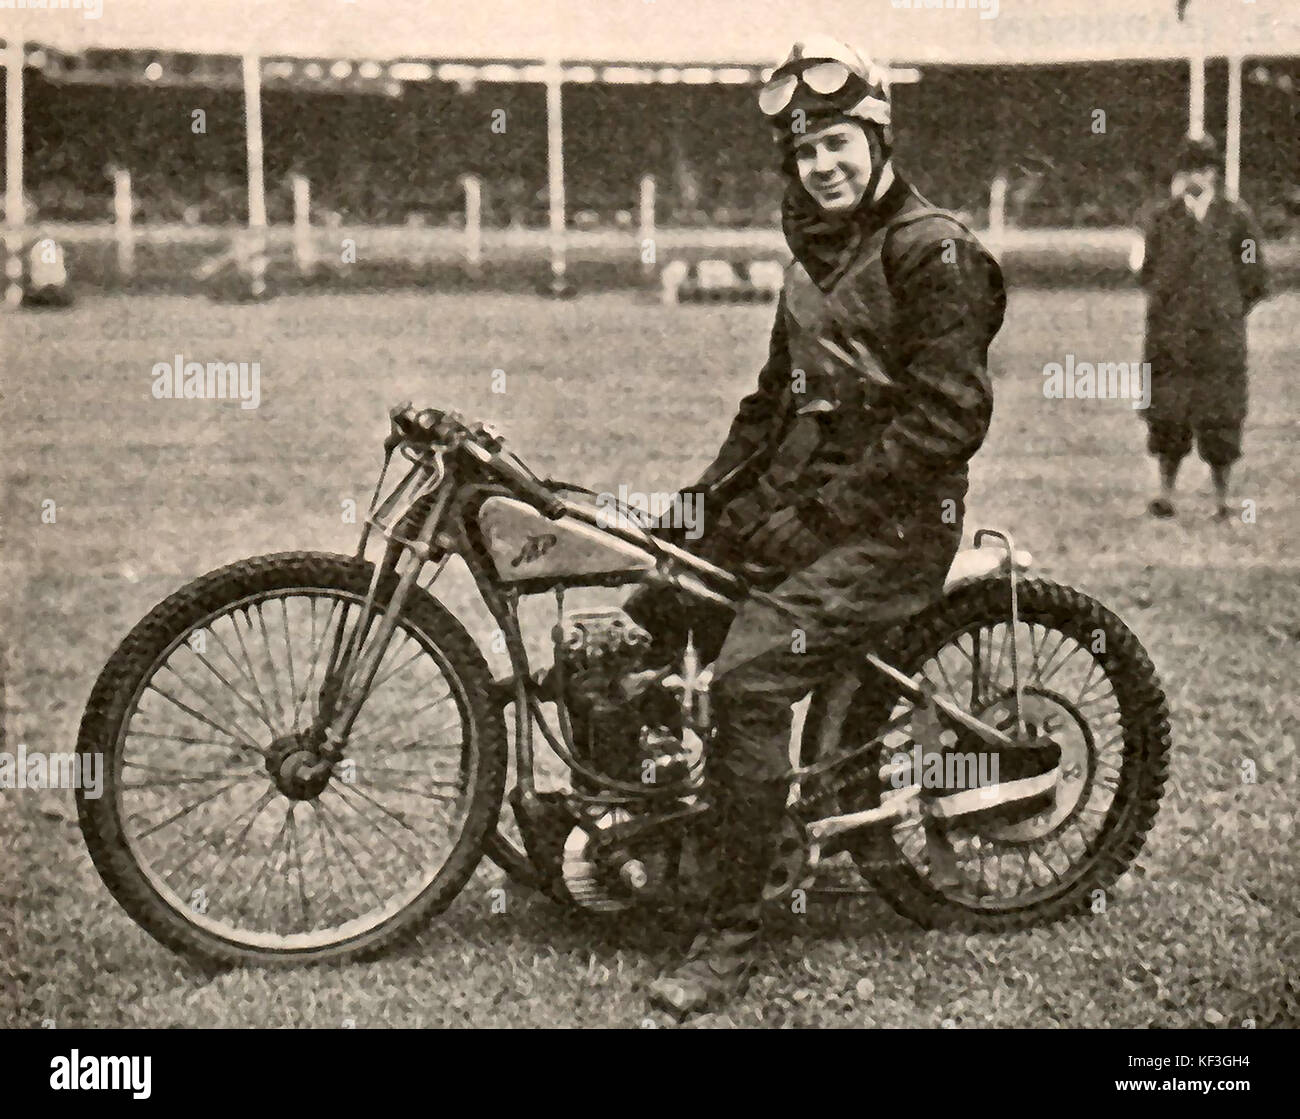 1932  A portrait of Billy Lamont the then famous Australian Speedway Rider on the latest J.A.P. racer believed to have been photographed prior to the A Johnny Hoskins'-led Anglo/Australian promotion , ('World's Championship Final') at the Sydney Showground Speedway (Speedway Royal) Stock Photo